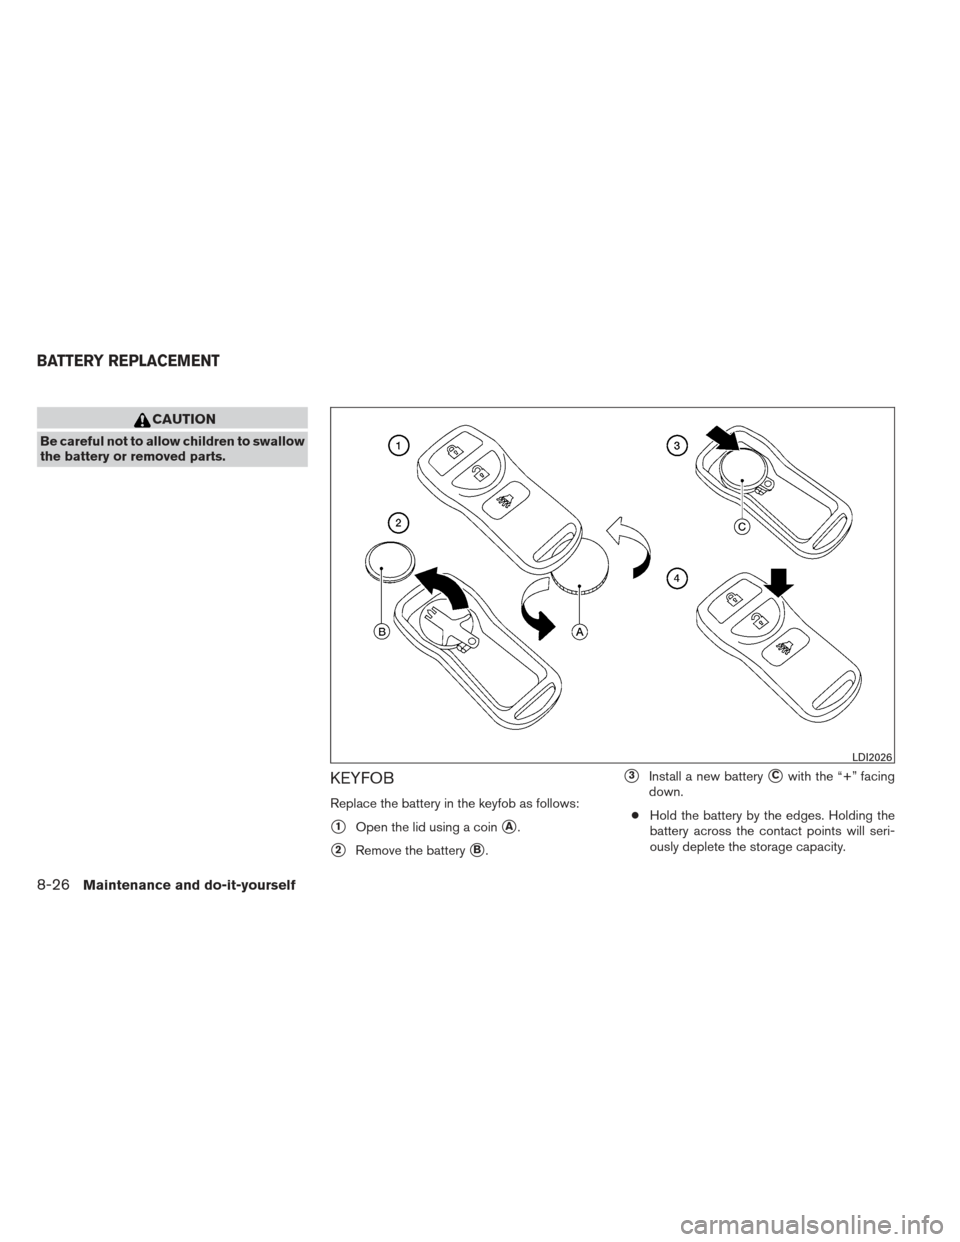 NISSAN XTERRA 2012 N50 / 2.G Service Manual CAUTION
Be careful not to allow children to swallow
the battery or removed parts.
KEYFOB
Replace the battery in the keyfob as follows:
1Open the lid using a coinA.
2Remove the batteryB.
3Install 